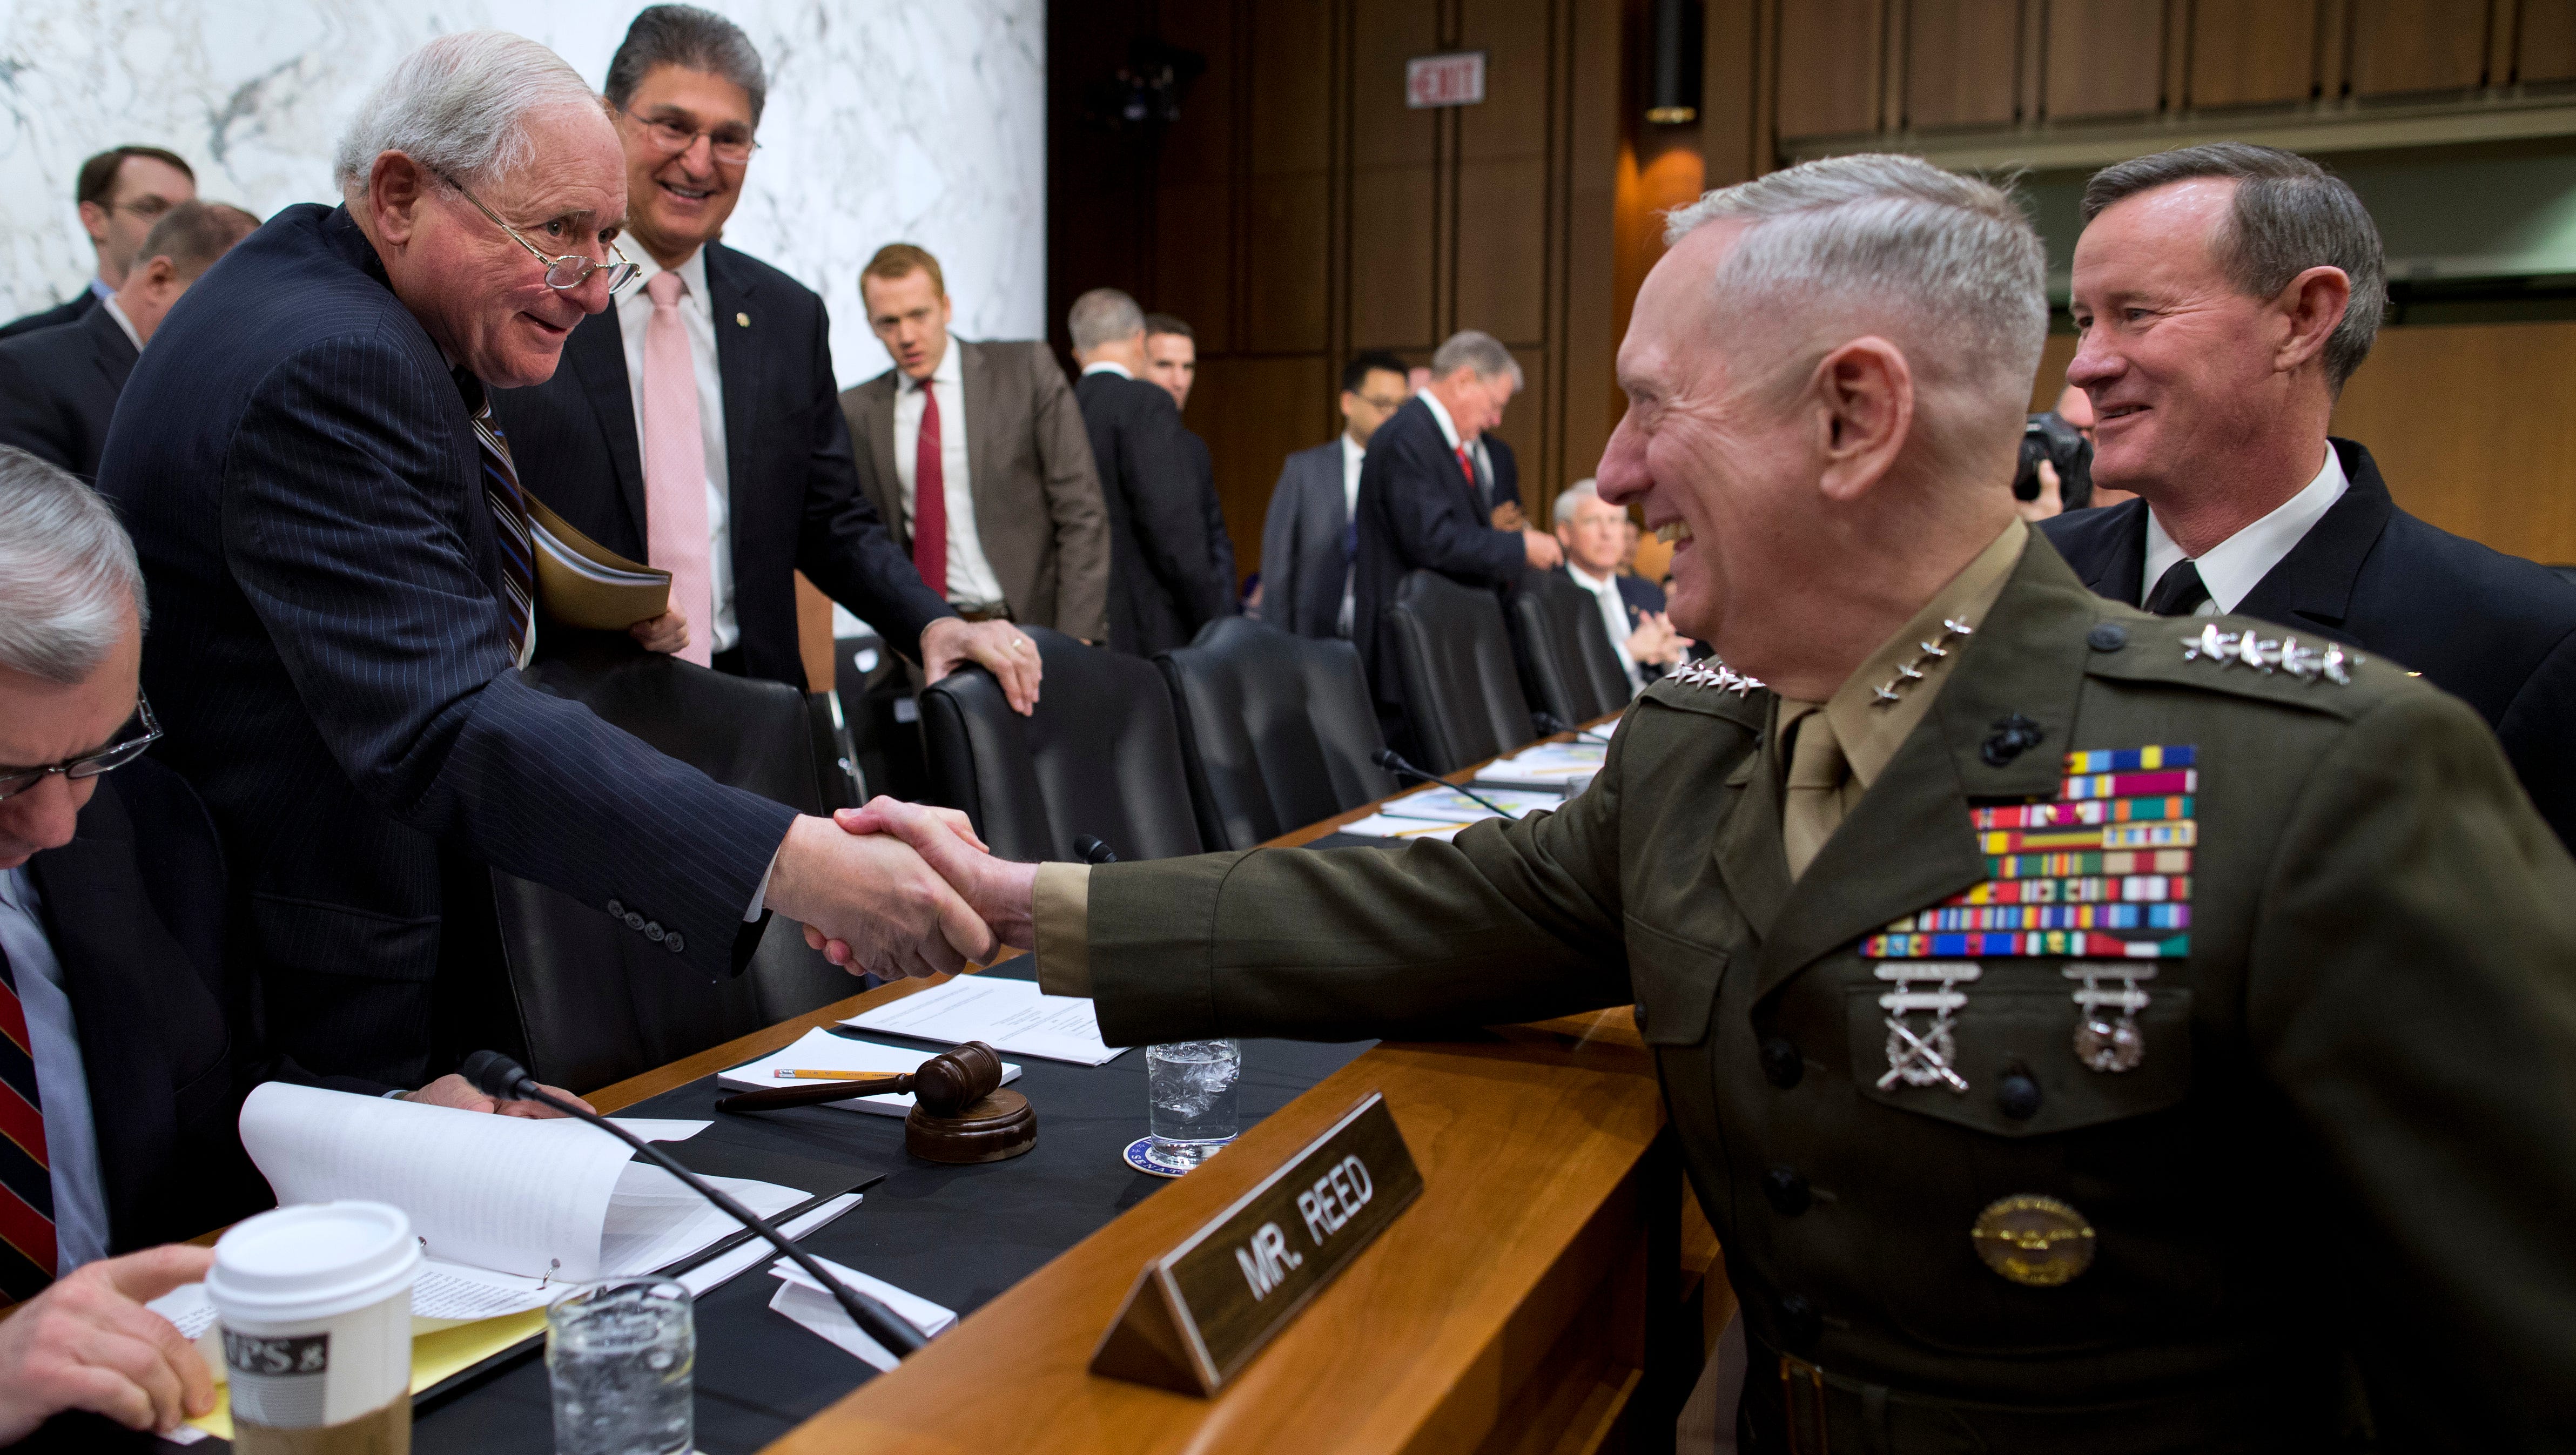 Sen. Carl Levin, left, accompanied by committee member Sen. Joe Manchin, D-W.Va., second from left, greets Marine Gen. James Mattis, commander, U.S. Central Command, center, and Navy Adm. William McRaven, commander, U.S. Special Operations Command, right, on Capitol Hill March 5, 2013, prior to the start of the committee's hearing to review of the Defense Authorization Request for Fiscal Year 2014 and the Future Years Defense Program.